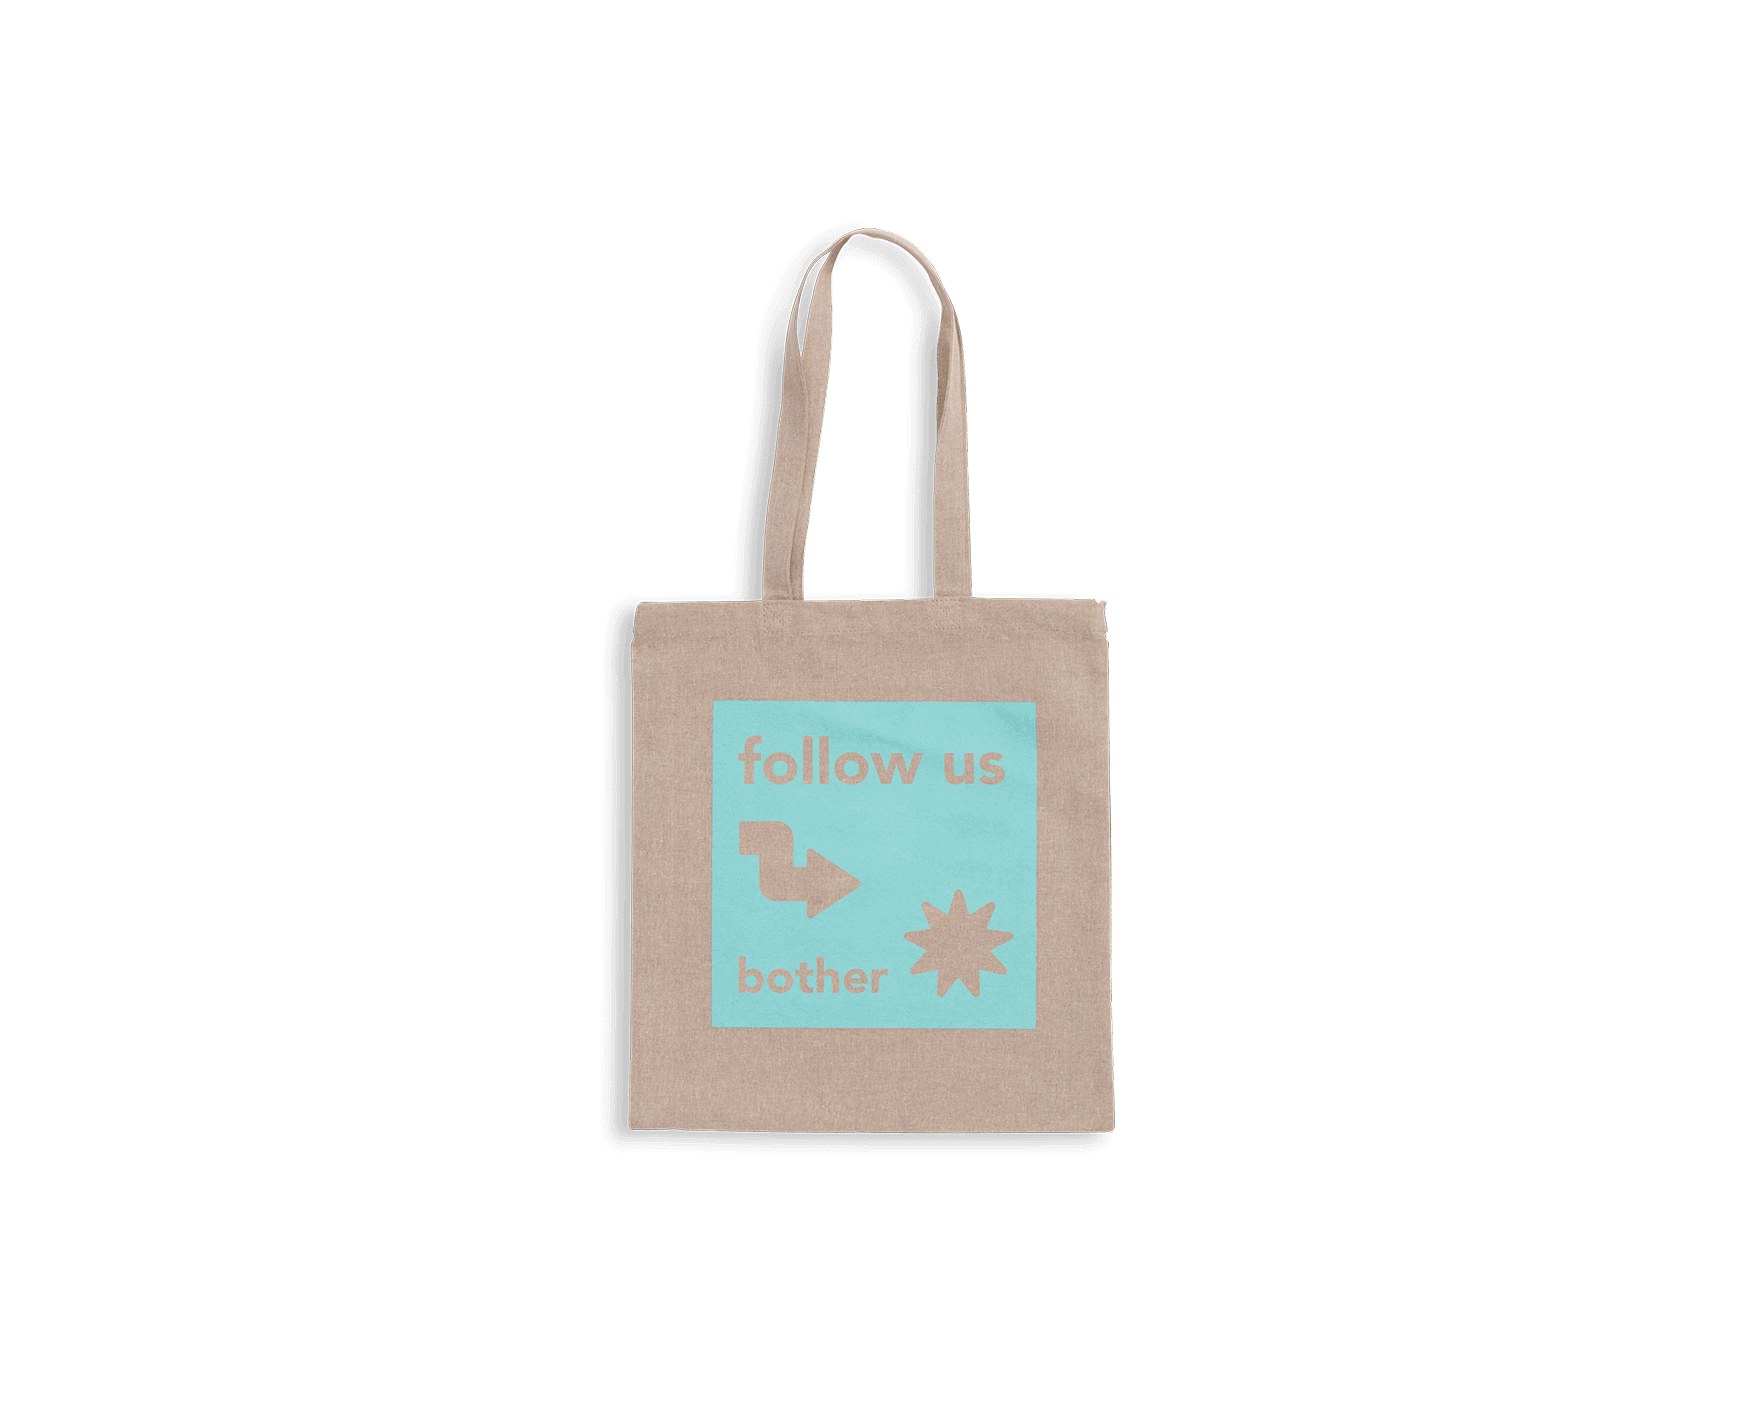 Tote bag for women organic cotton personalized designs. excellent quality